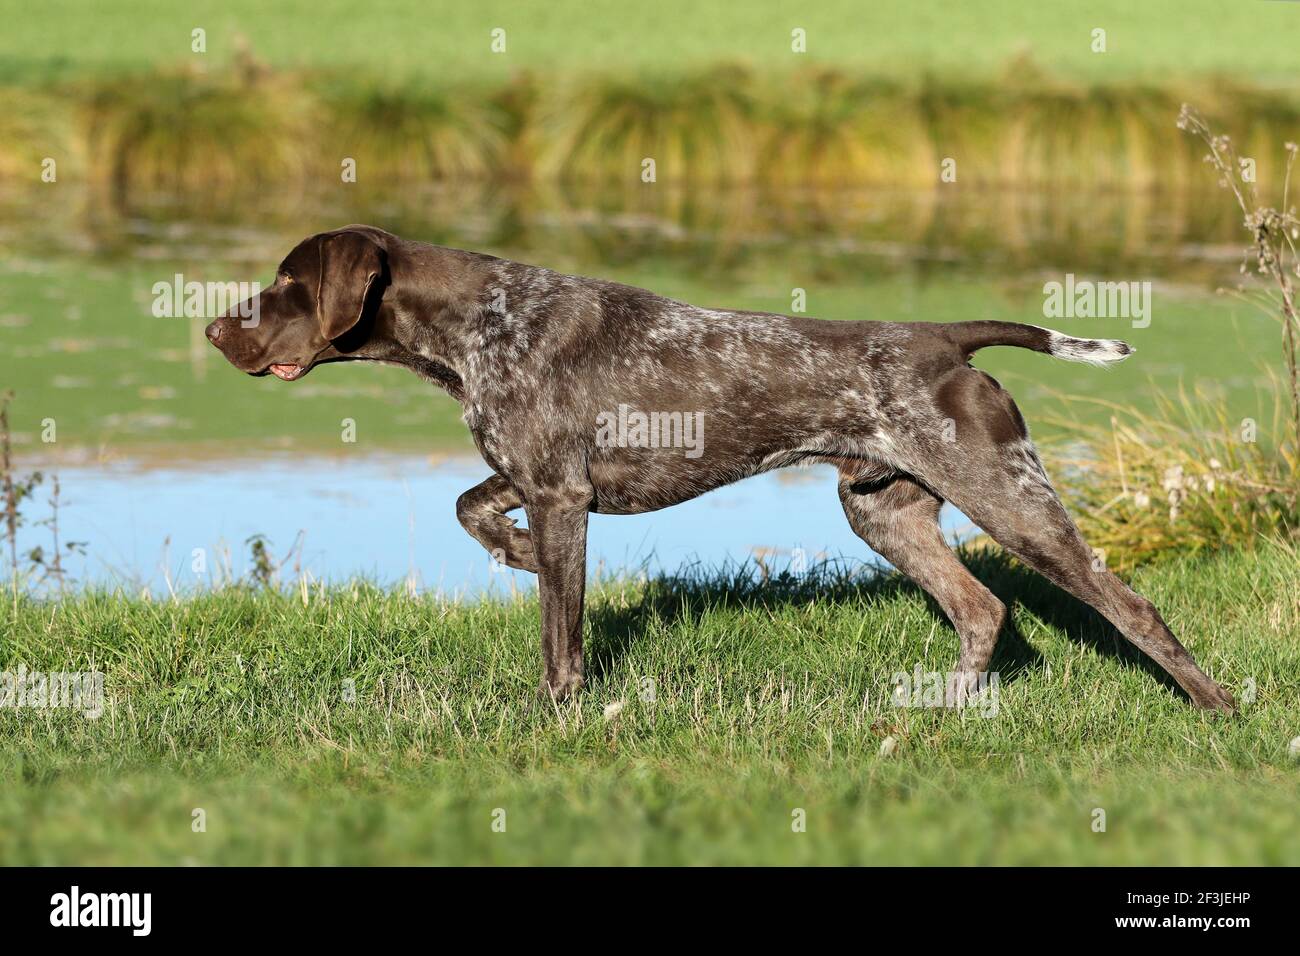 German Shorthaired Pointer. Male, 21 months old, standing in front of game birds (in classic point stance). Germany Stock Photo